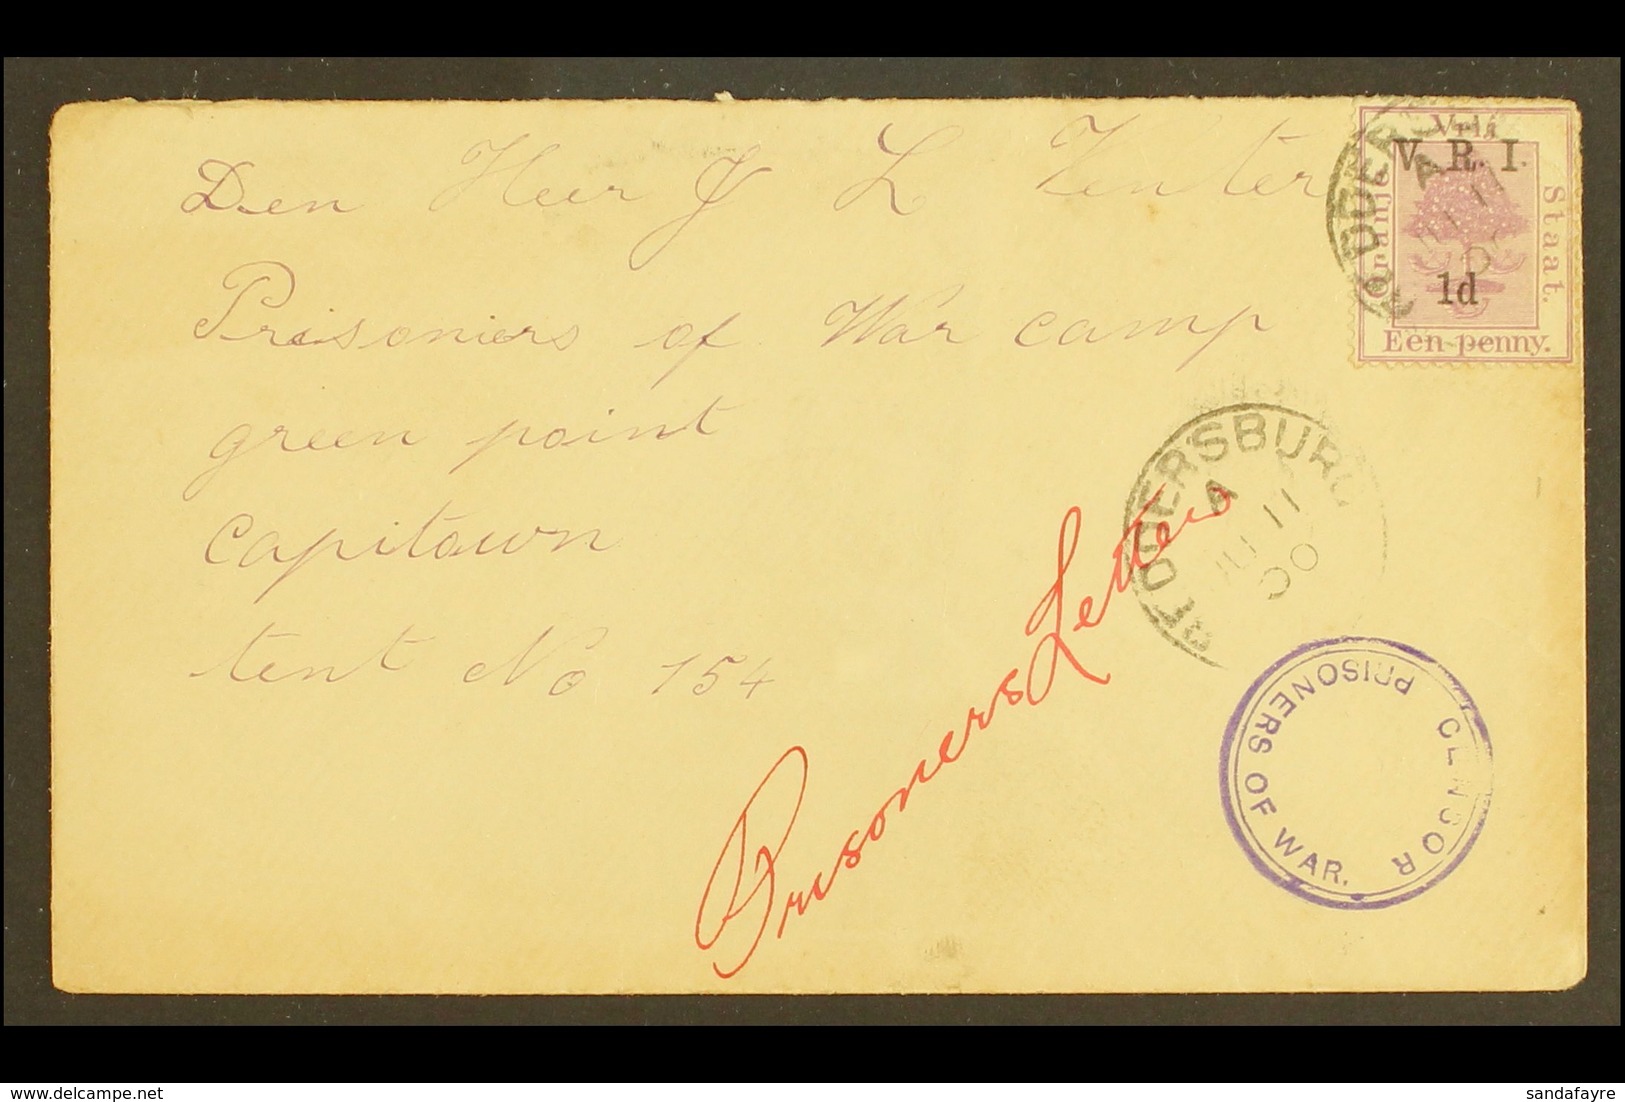 BOER WAR 1900 (11 June) Cover To Prisoner Of War Camp At Green Point, Cape Town, Bearing OFS 1d "V.R.I." Tied By Redders - Unclassified